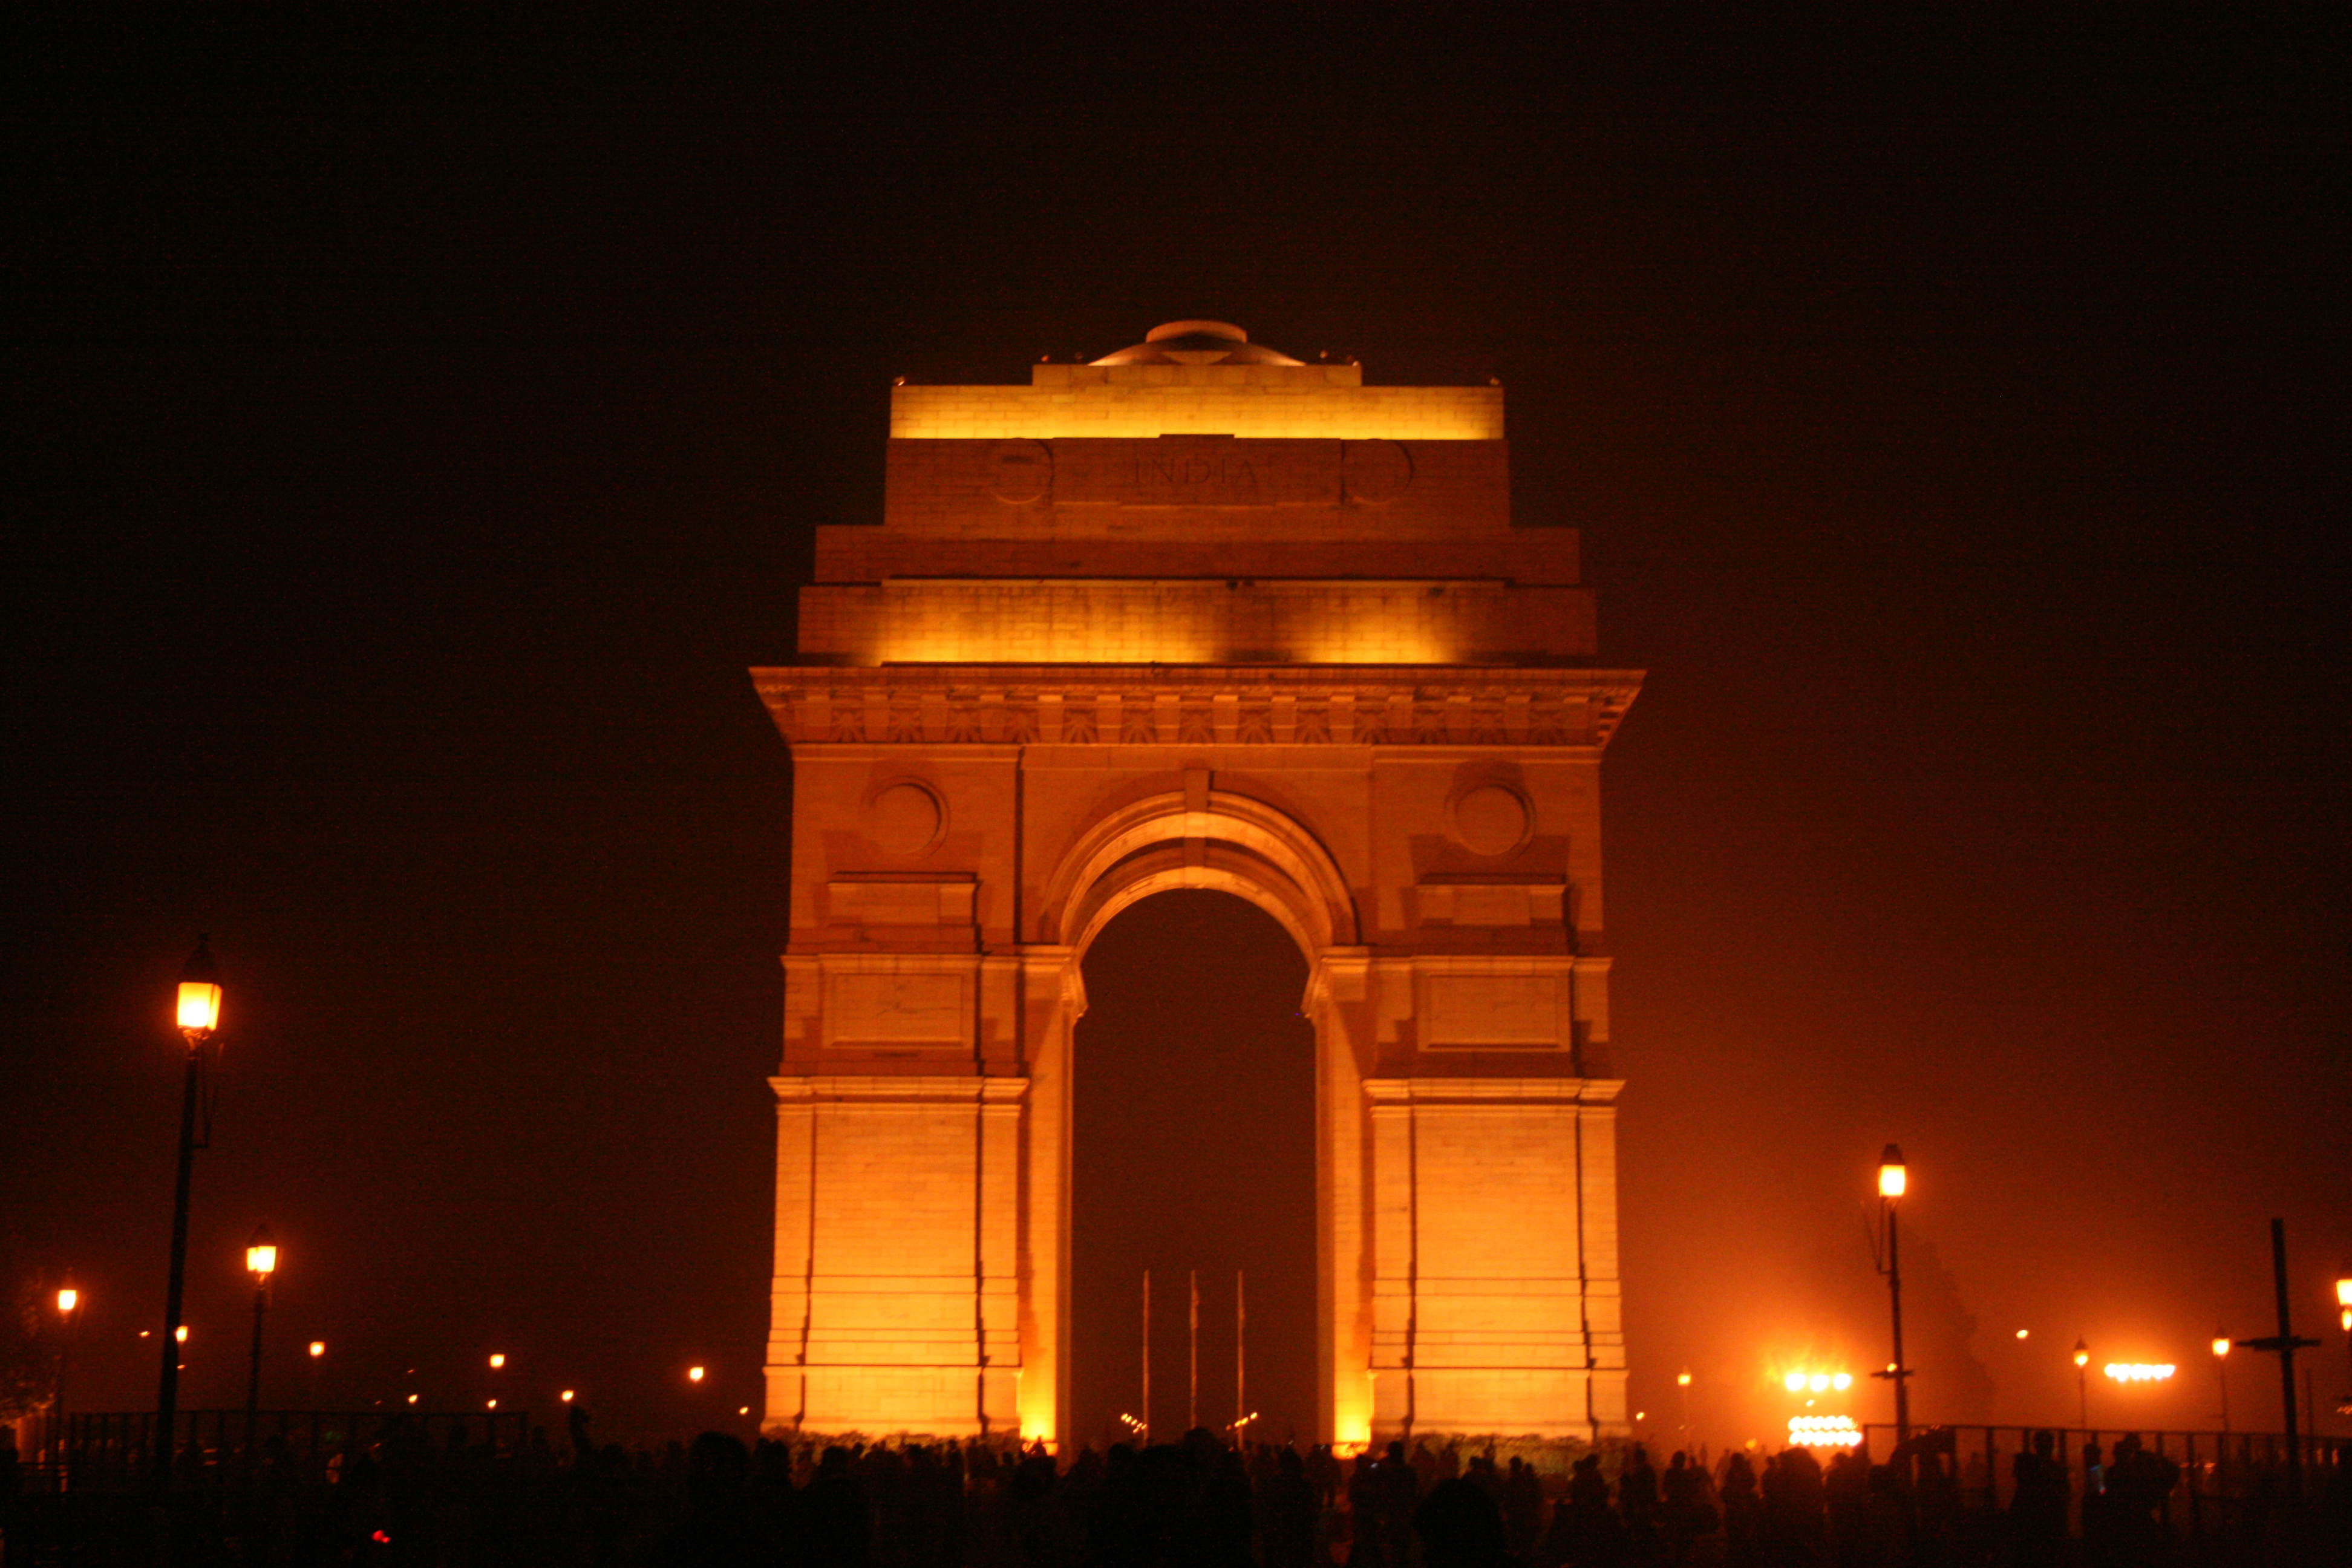 India gate wallpaper by Rajout  Download on ZEDGE  9905